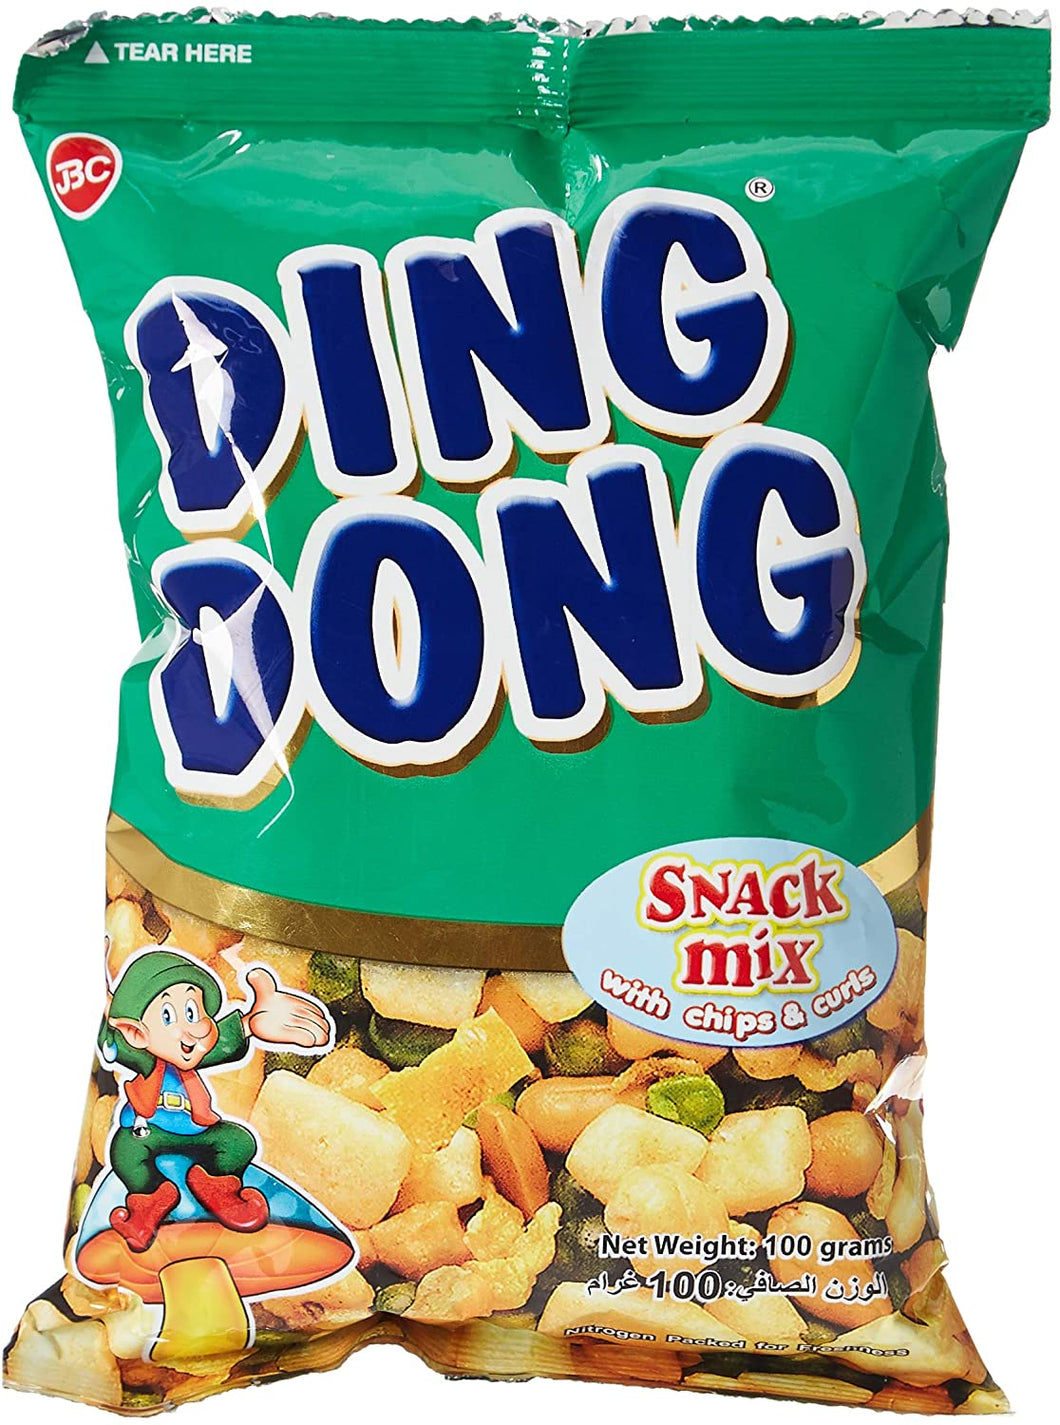 DING DONG - SNACK MIX